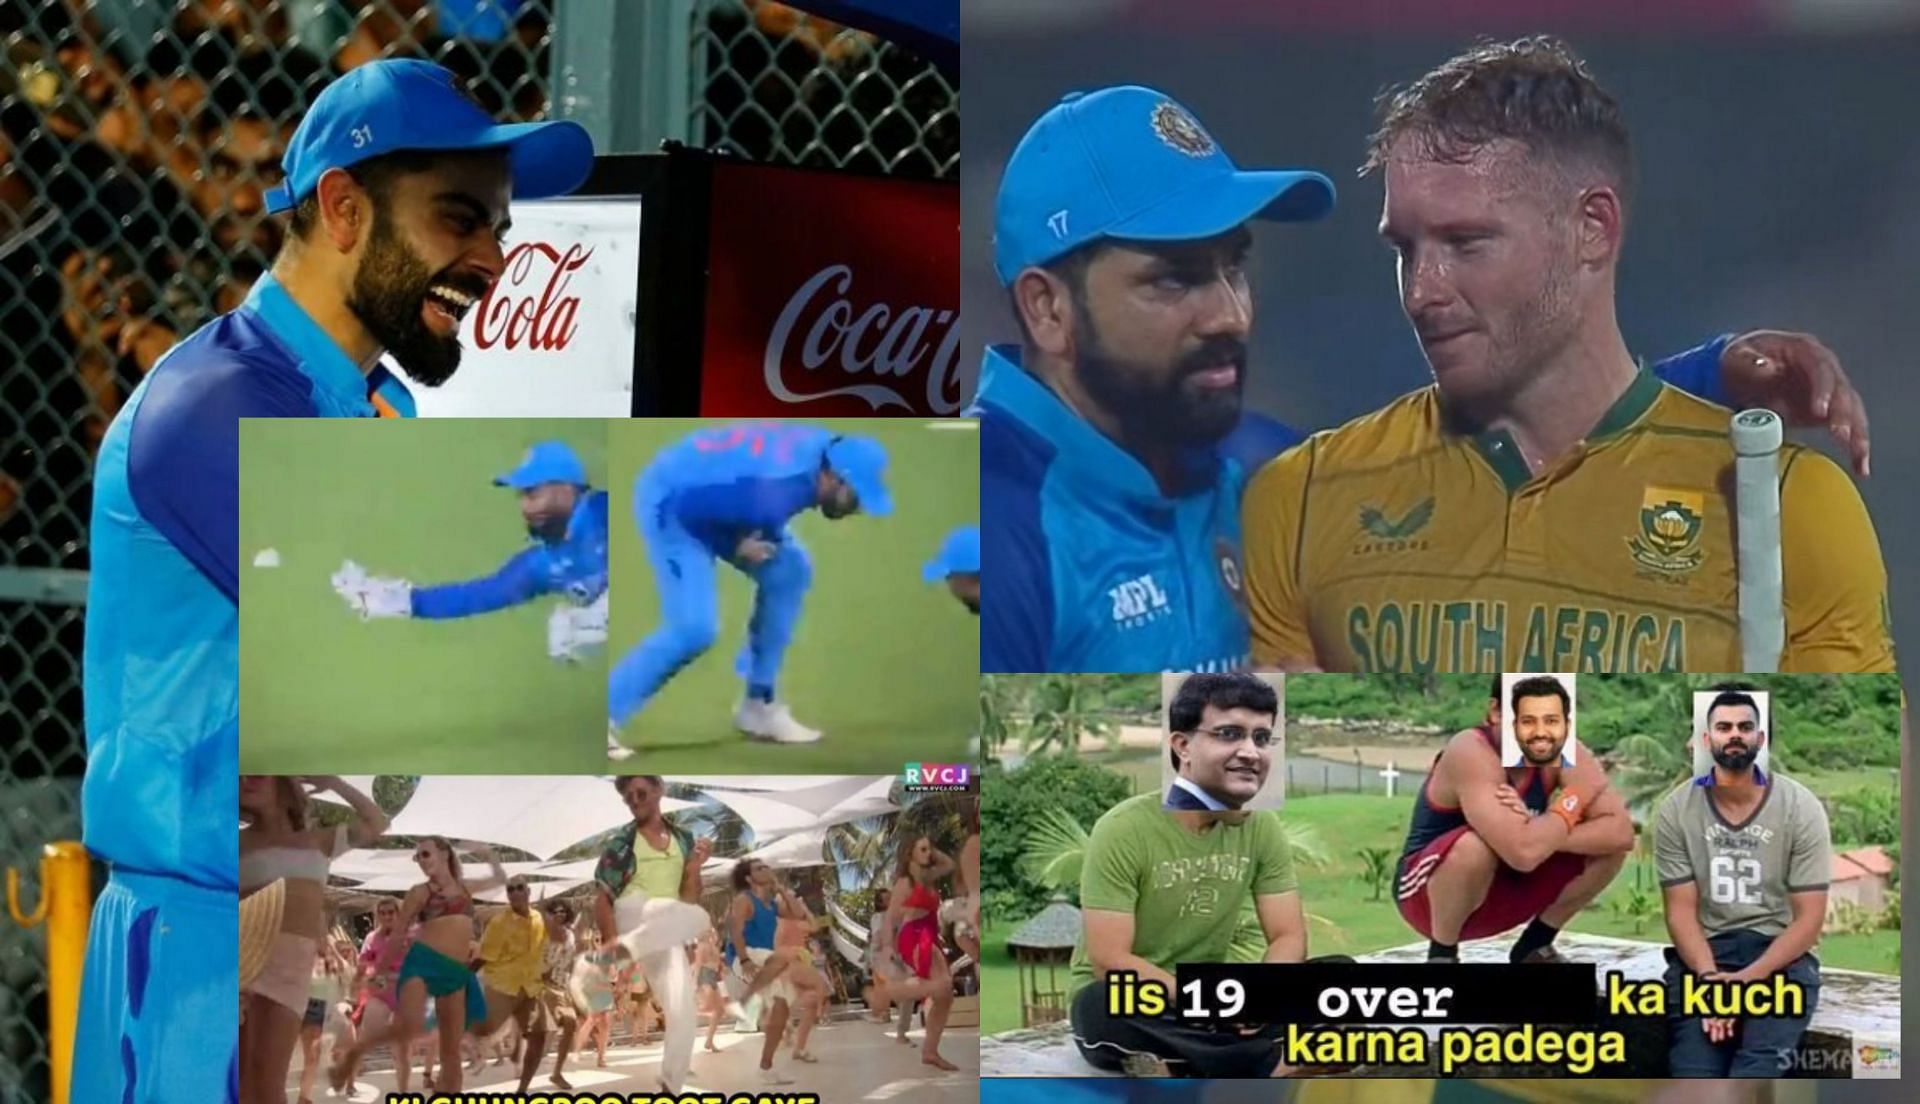 Fans share memes after Team India